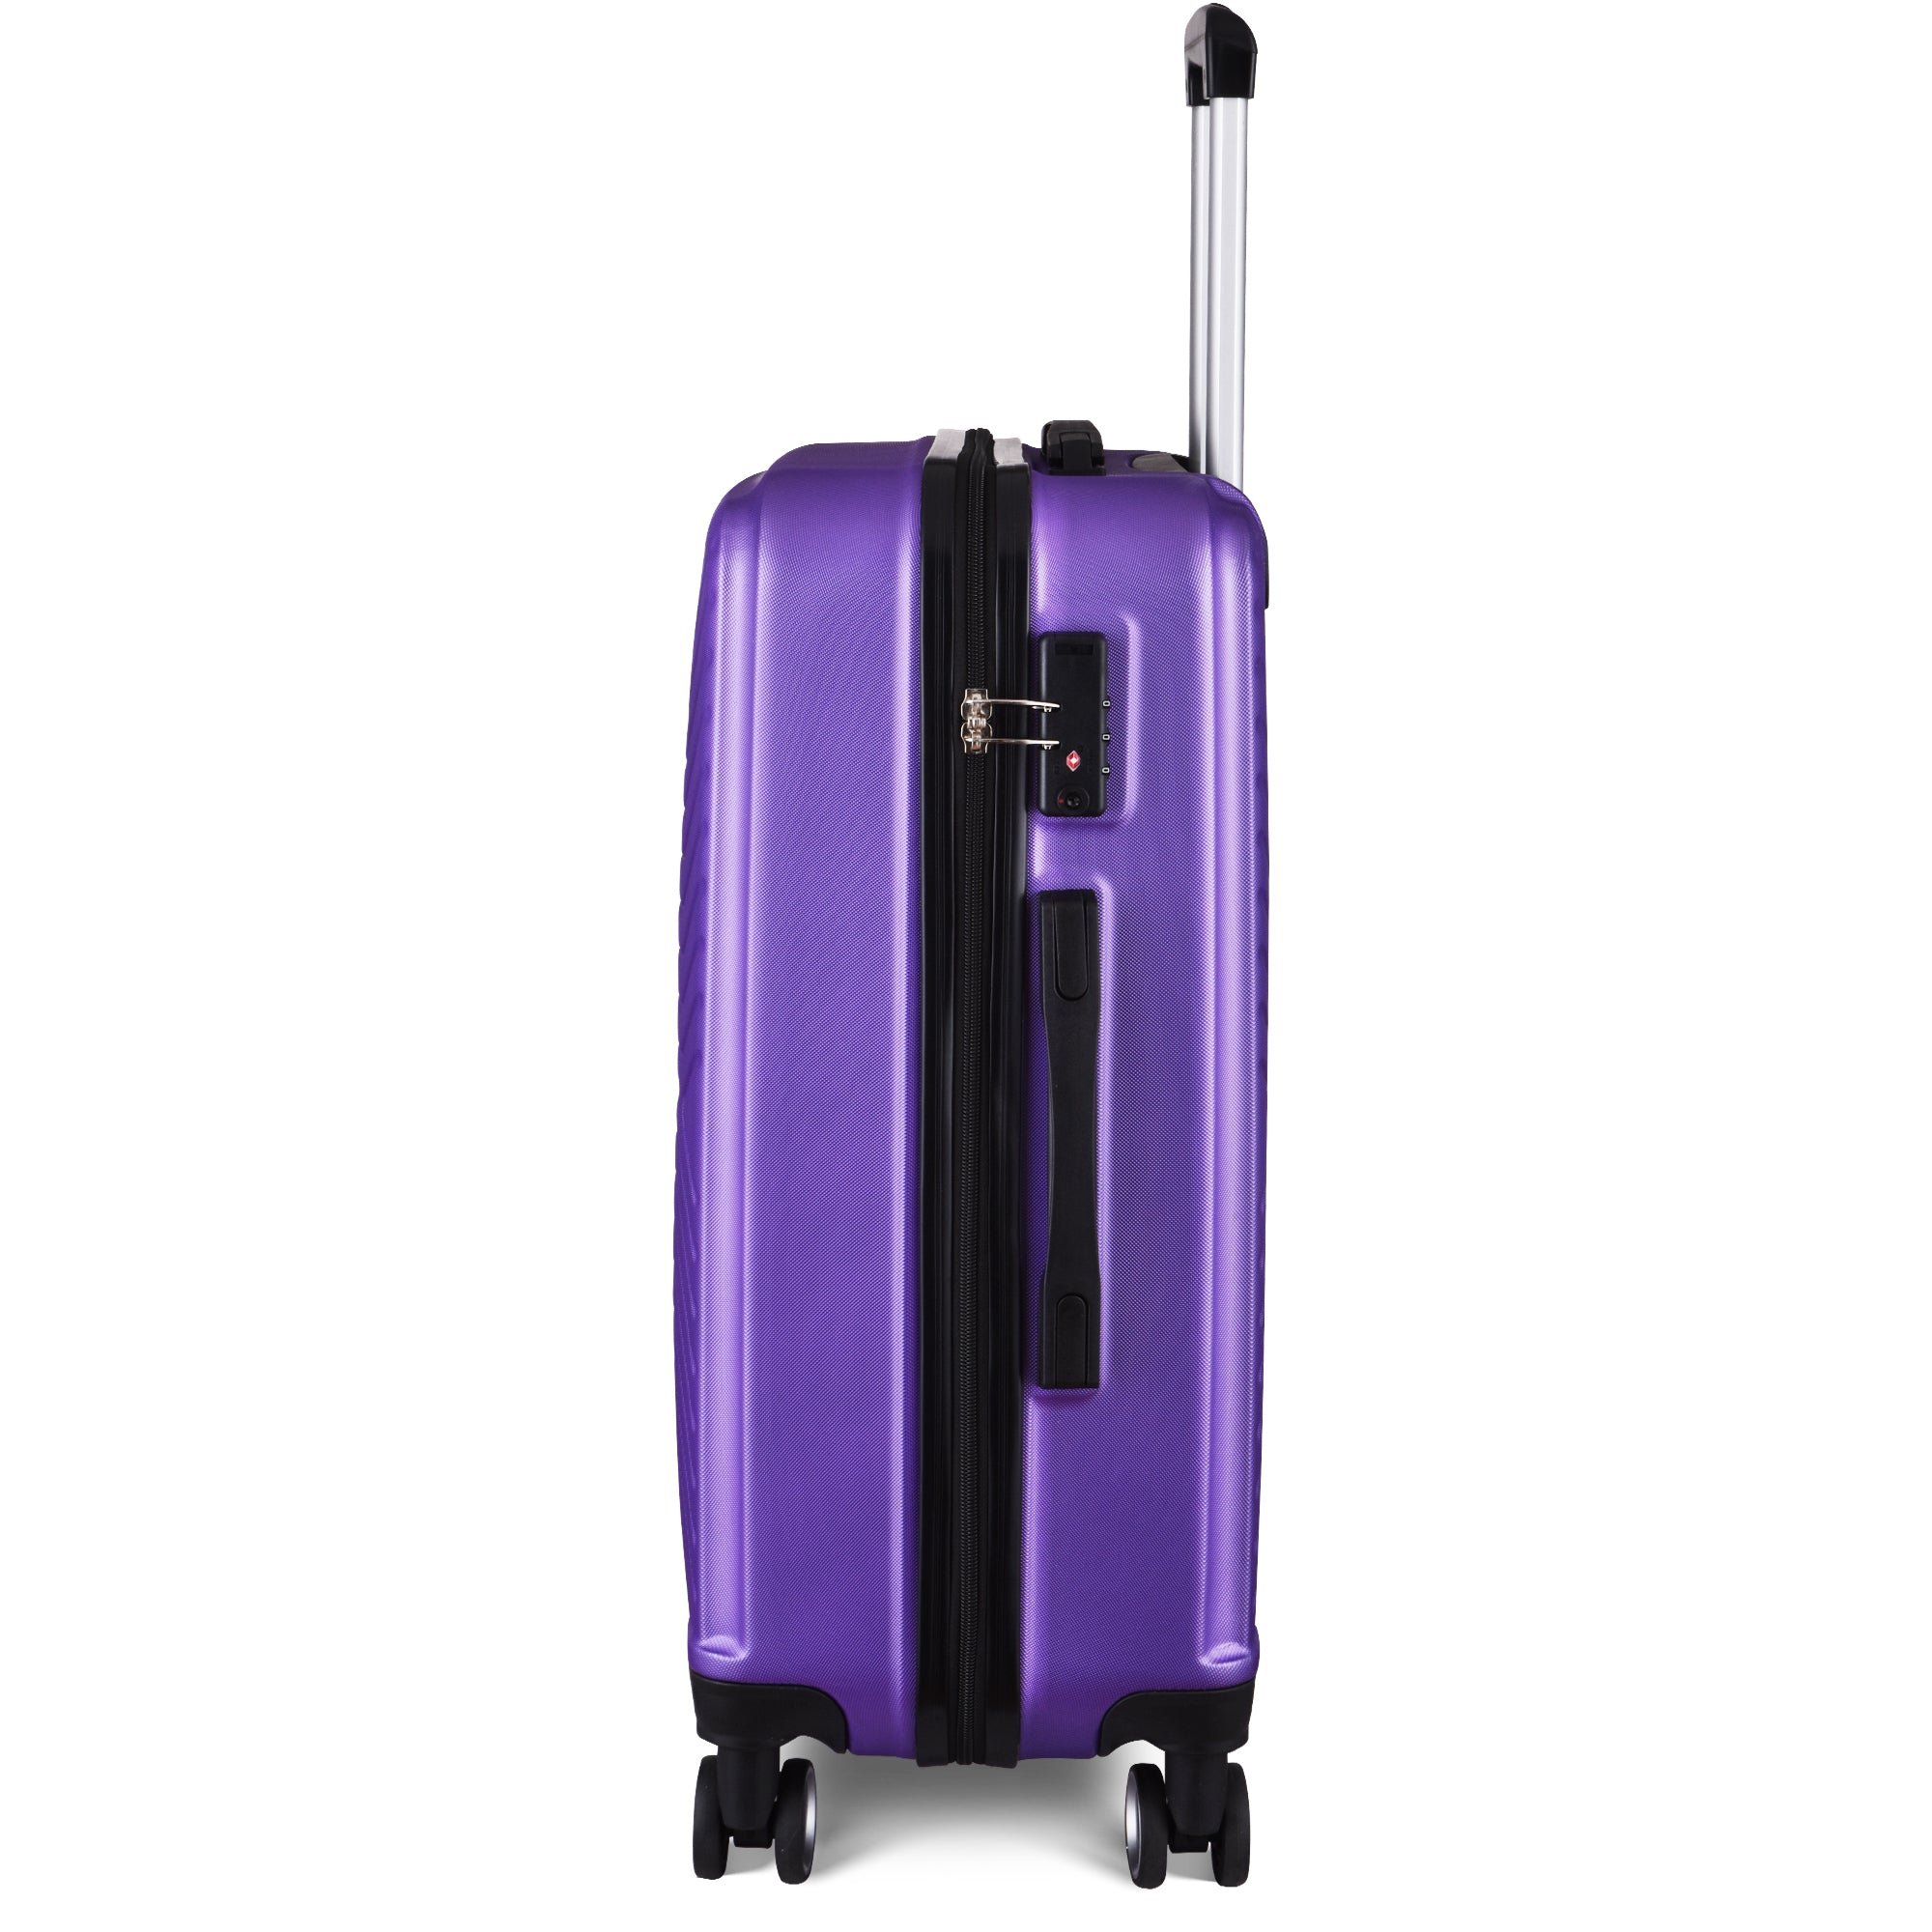 Luggage Sets 3 Piece Suitcase Set Hard Shell Carry on purple-abs